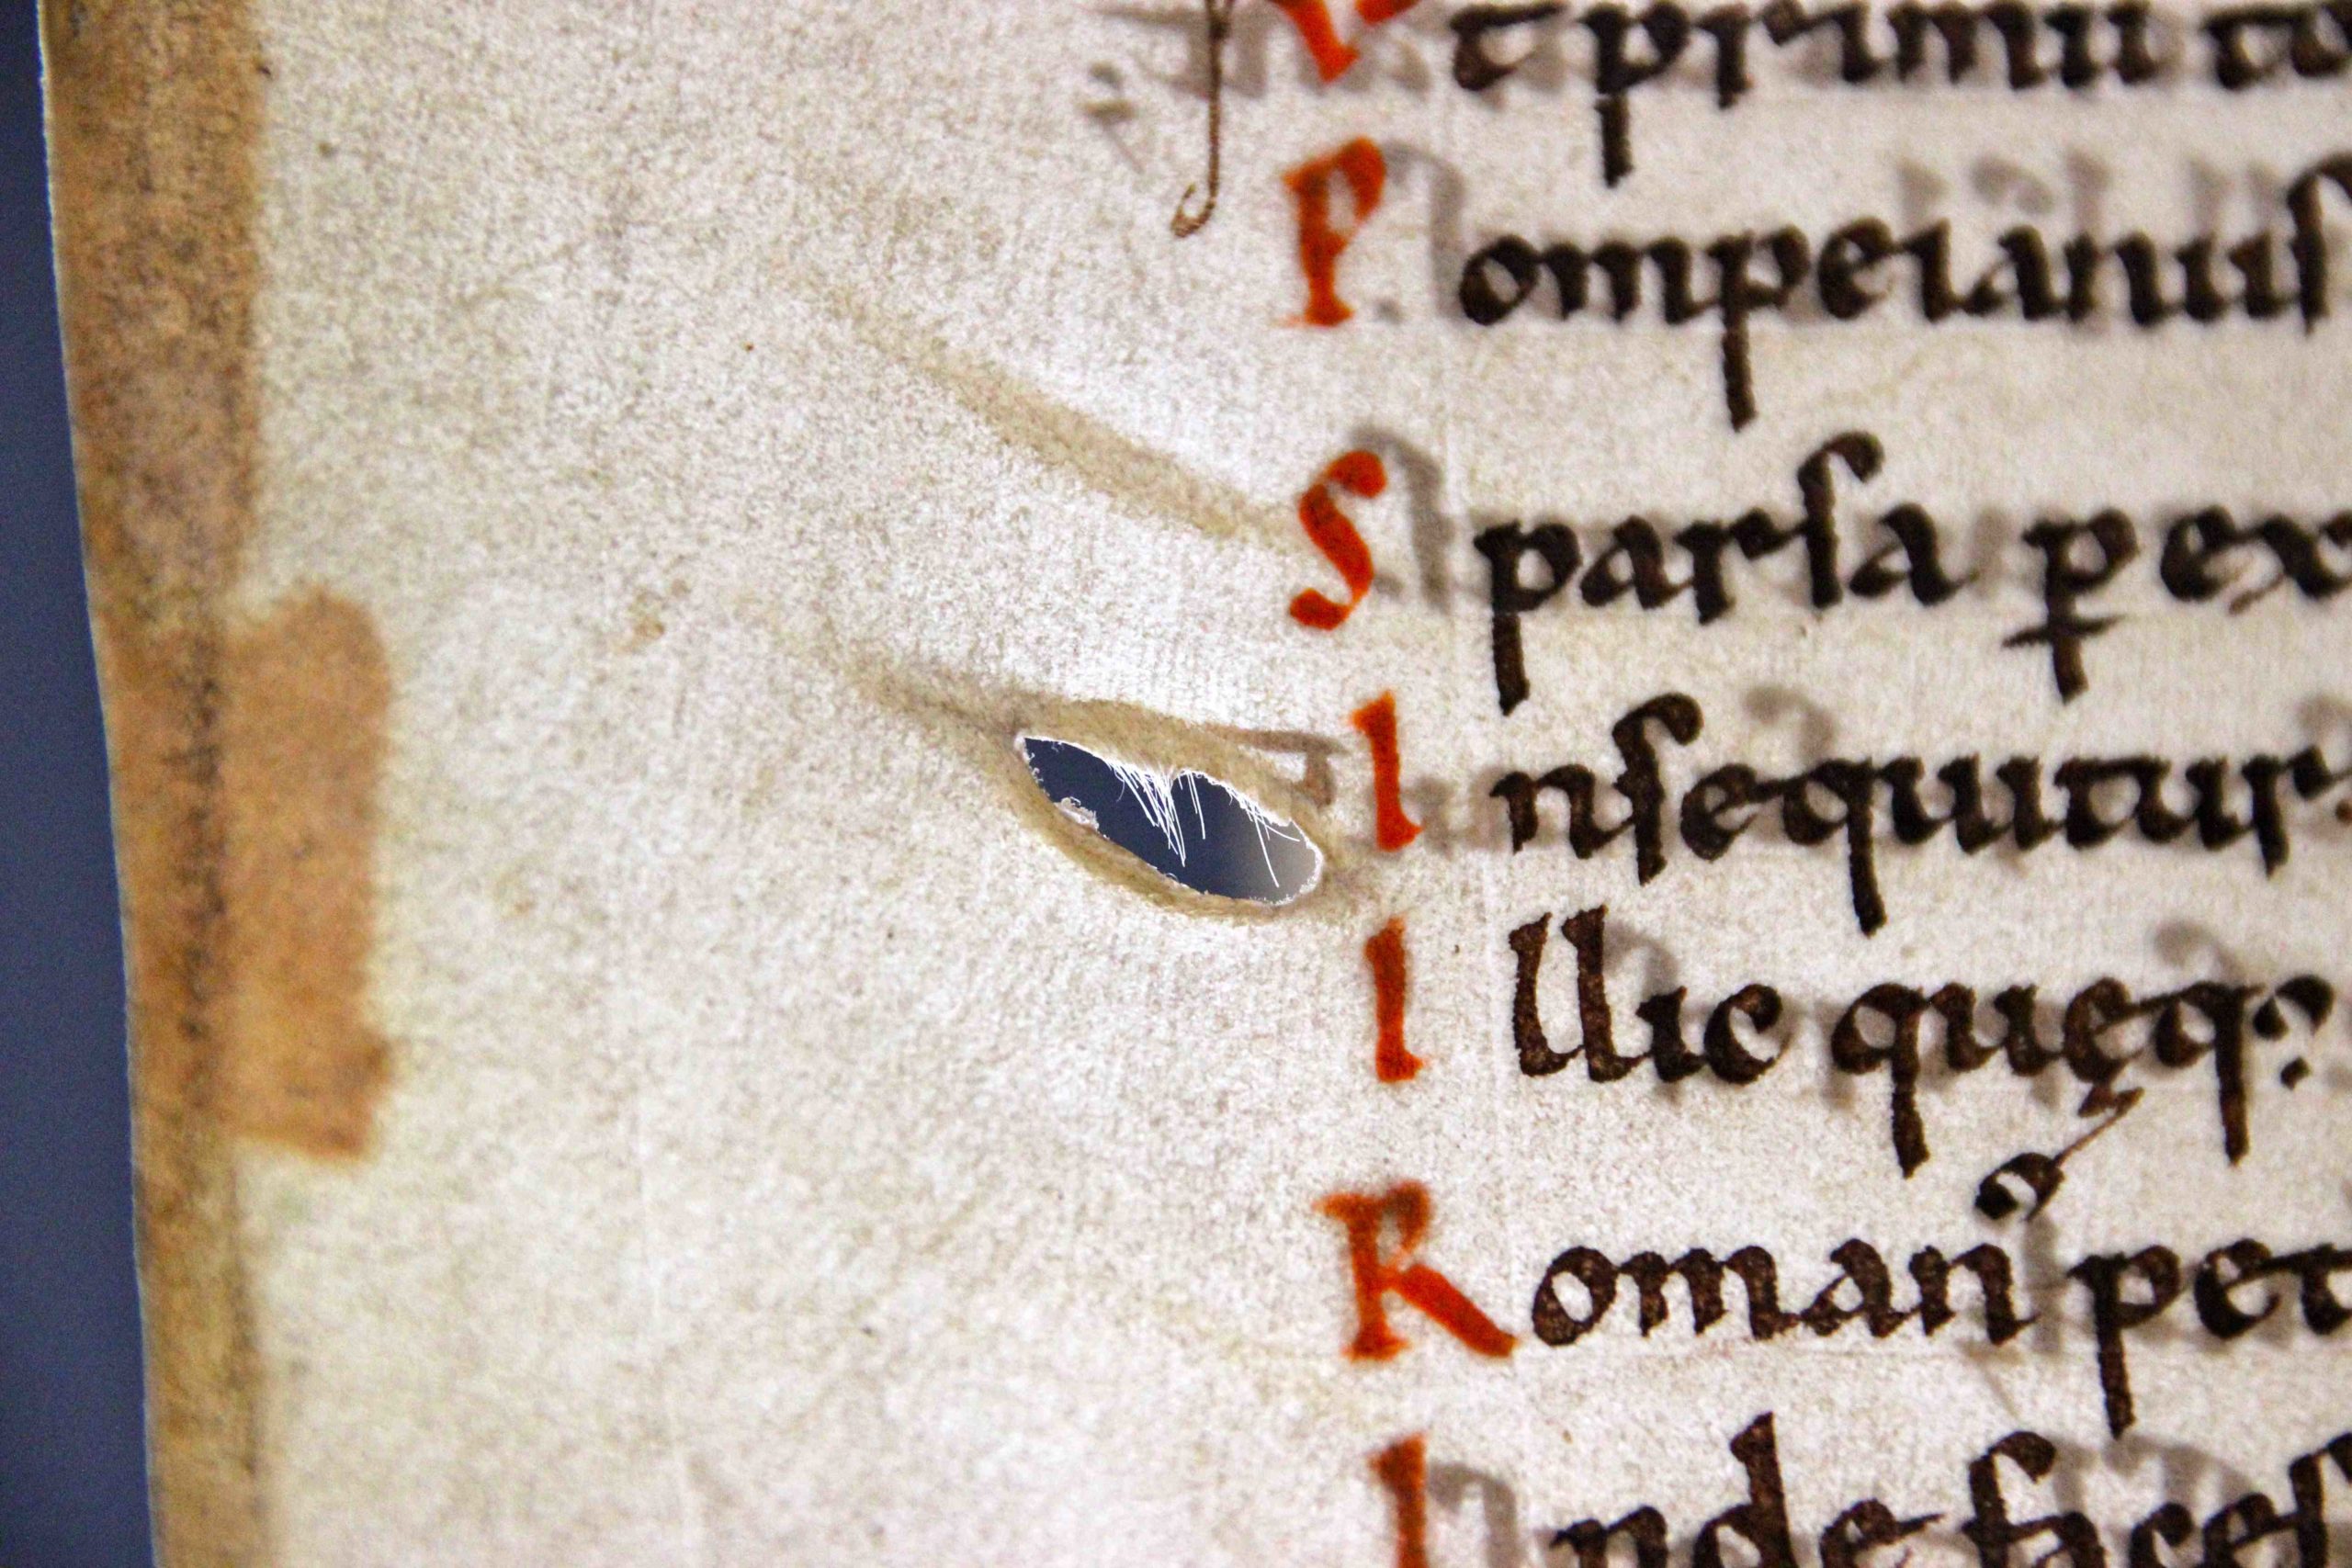 A cut, accidentally left there by the medieval parchment maker when he scraped the hairs off the processed skin. The hole contains some white hairs from the cow who "donated" his skin for the production of this book. BUR MS Q 1, c. 1100 (University Library, Leiden; photo: Erik Kwakkel)